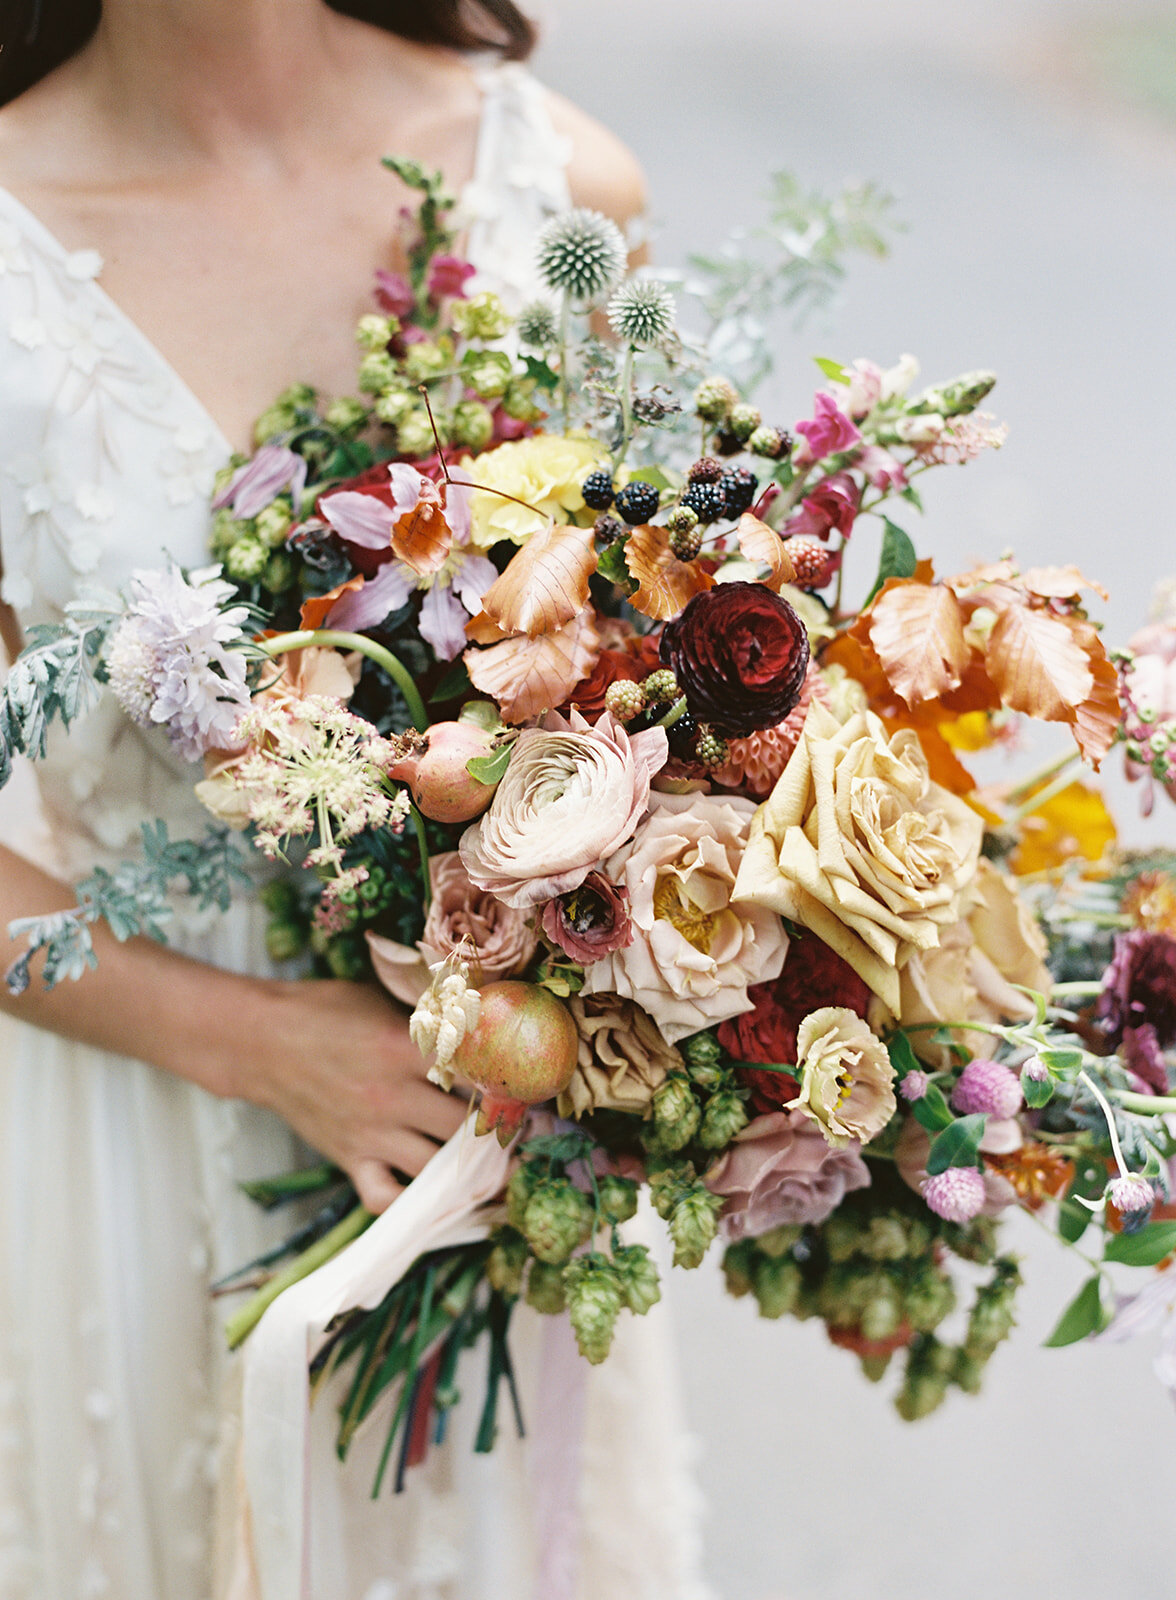 Lush, untamed bridal bouquet with garden roses, wildflowers, hops, blackberries, fruiting branches, ranunculus, copper beech, and natural greenery. Early fall RT Lodge wedding floral design by Rosemary & Finch, Nashville based florist..